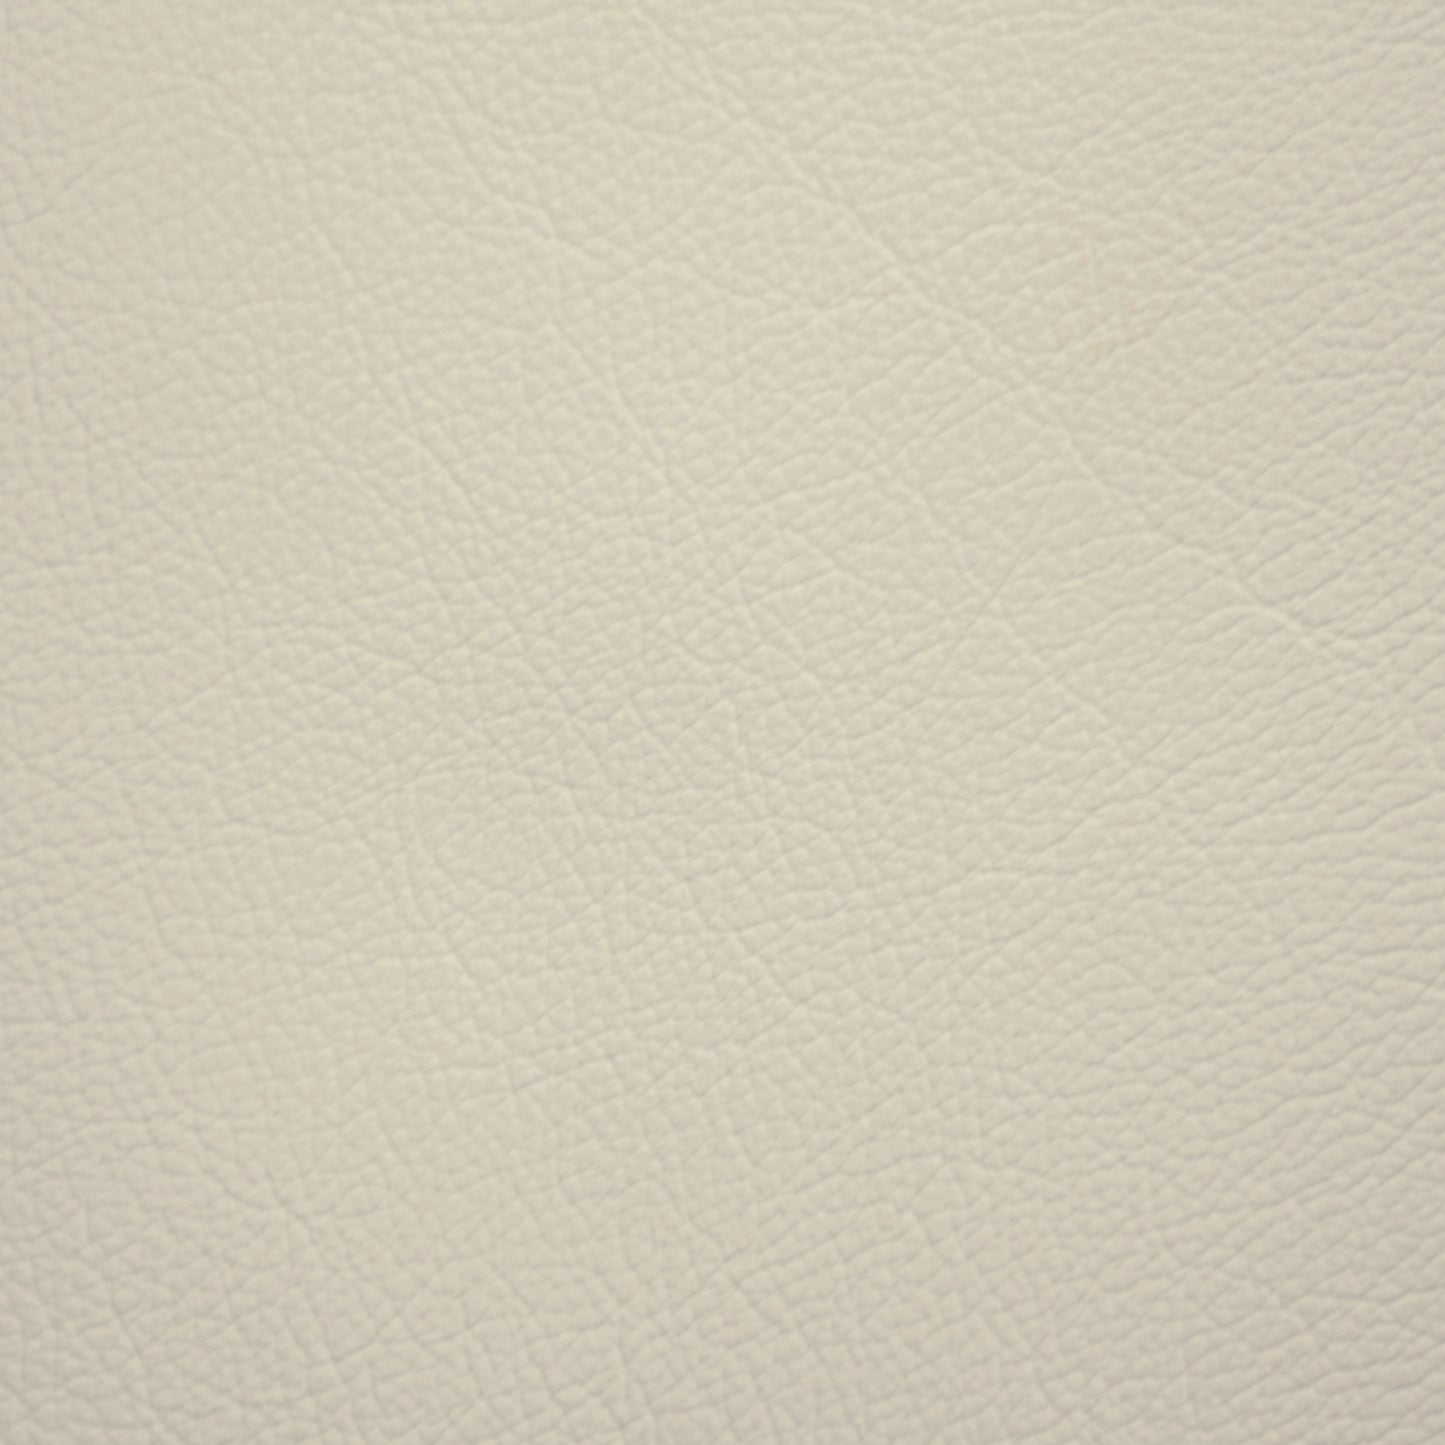 Diva, Talc, Iconic® Antimicrobial & Cleanable, Hospitality Leather Hide